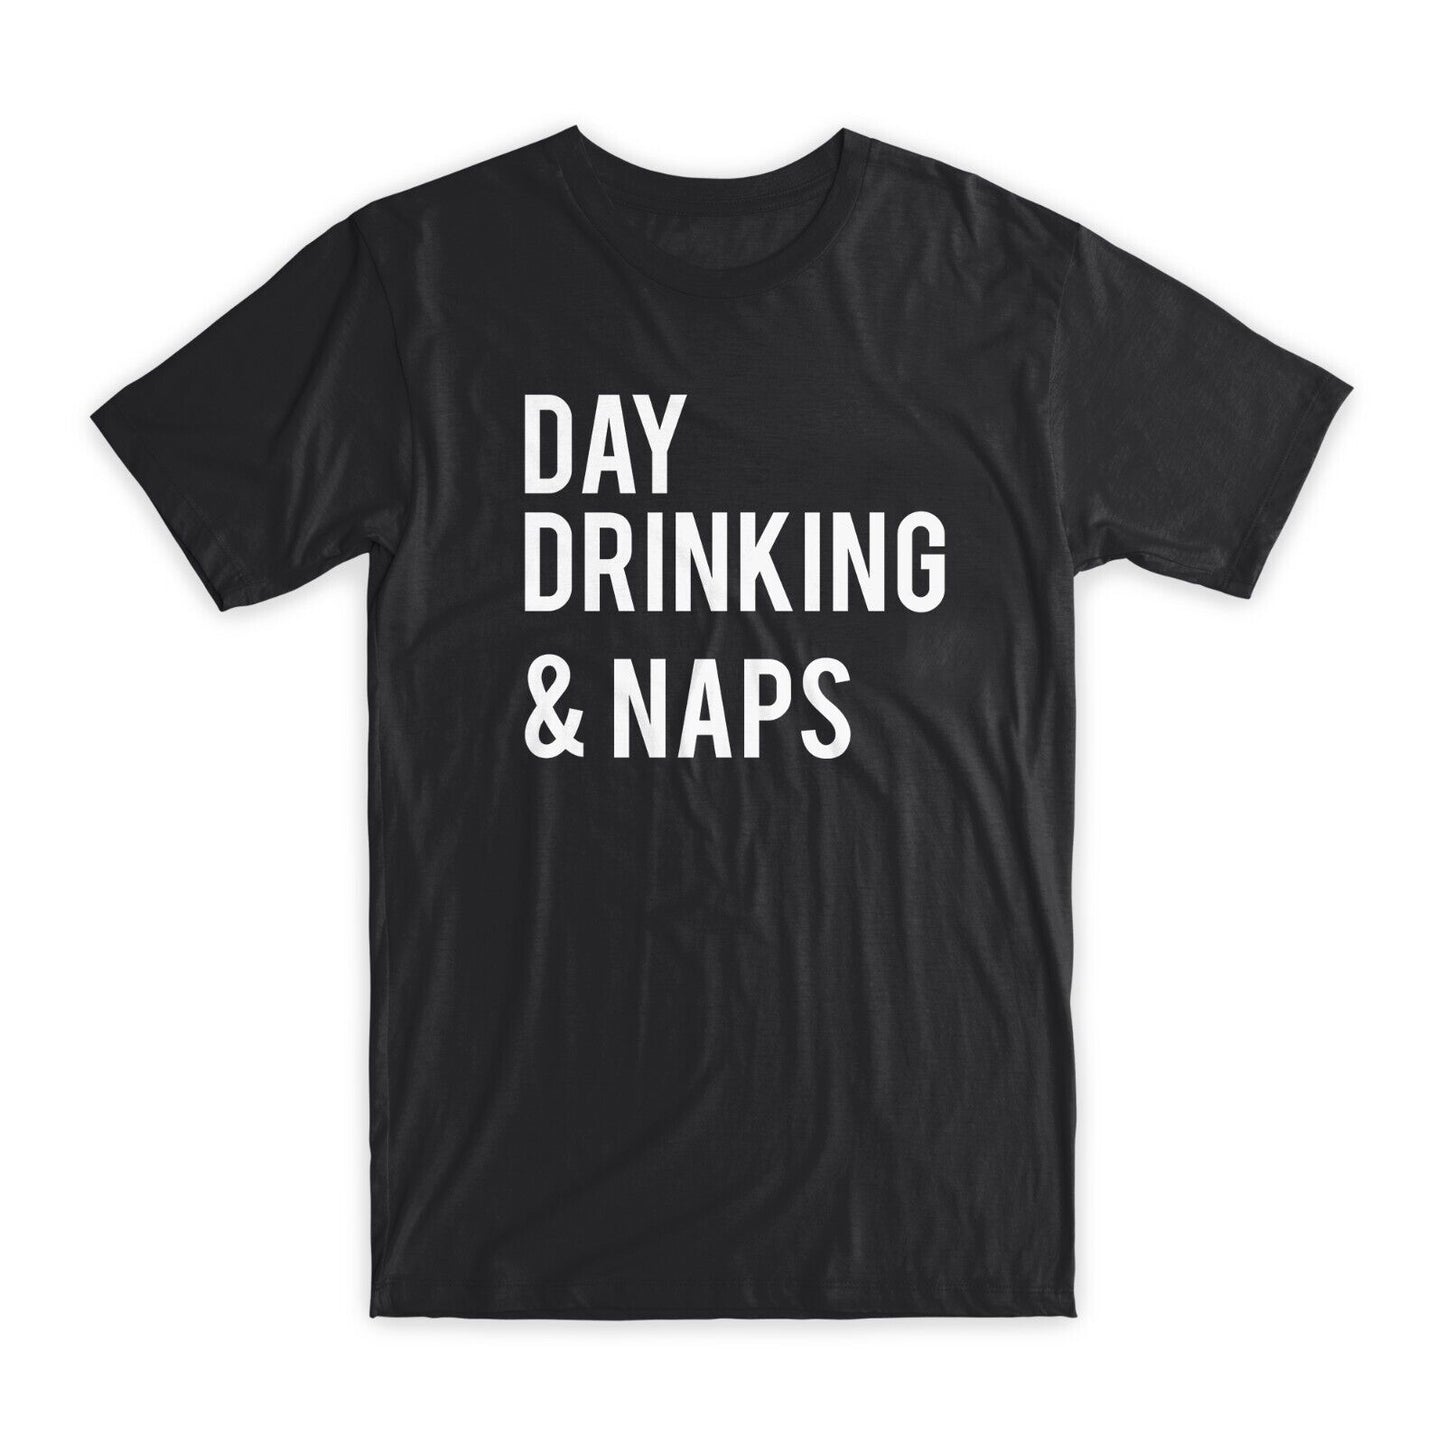 Day Drinking & Naps T-Shirt Premium Soft Cotton Crew Neck Funny Tees Gifts NEW